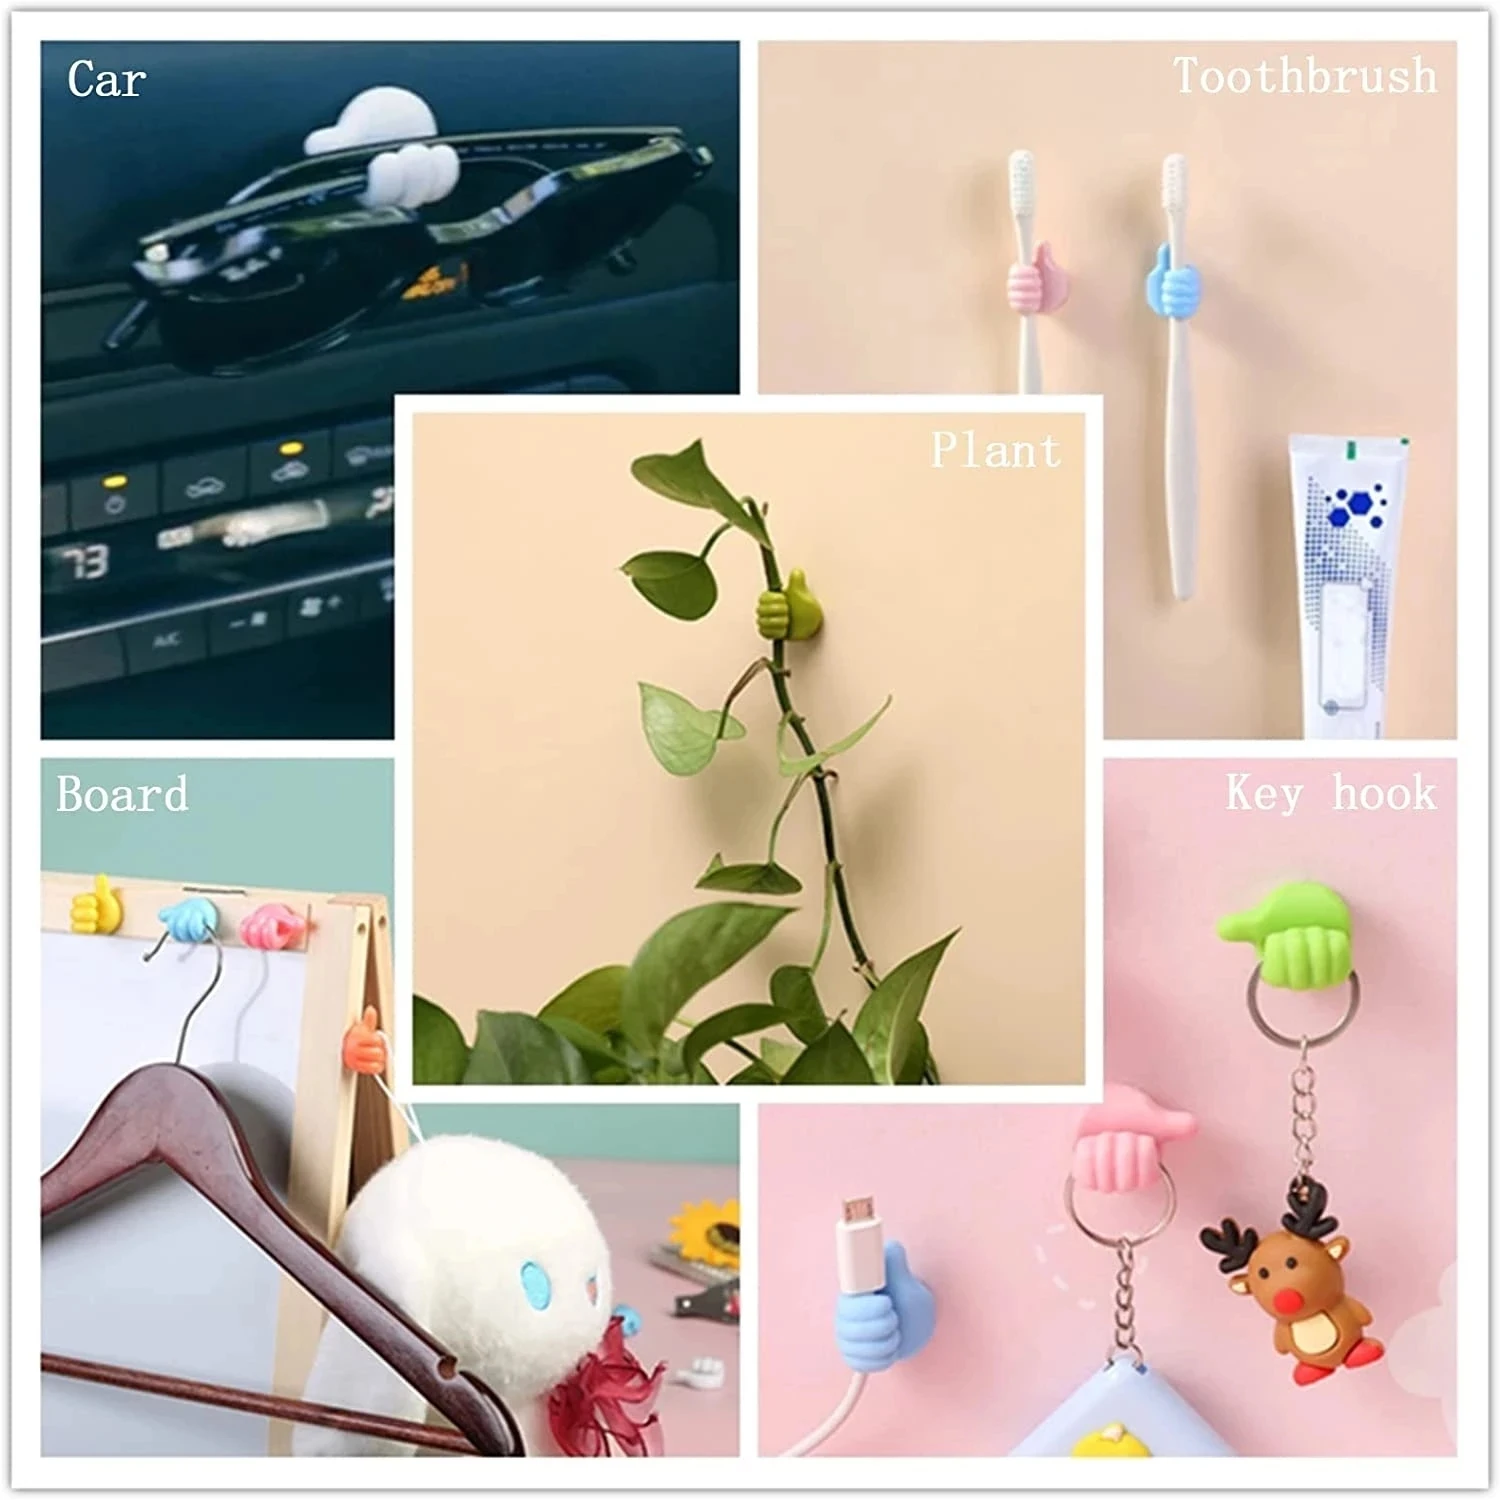 Hand-shaped Rubber Holder Glasses Cable Power Cord Charging Line Self Adhesive Mini Hook Car Storag Organizer Gadget Decorations images - 6